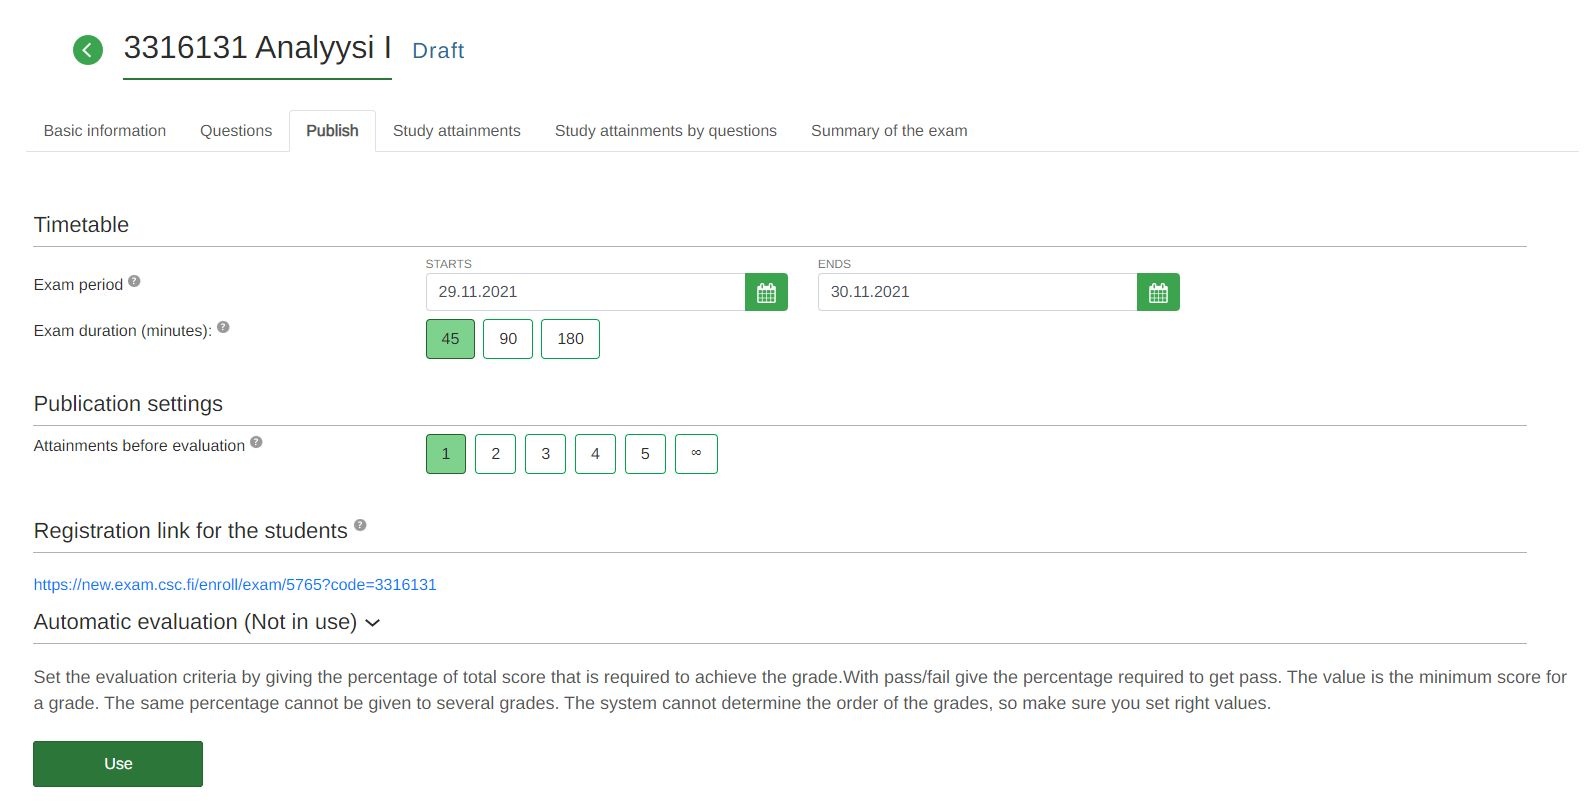 The image shows the Use button from which automatic evaluation will be enabled.